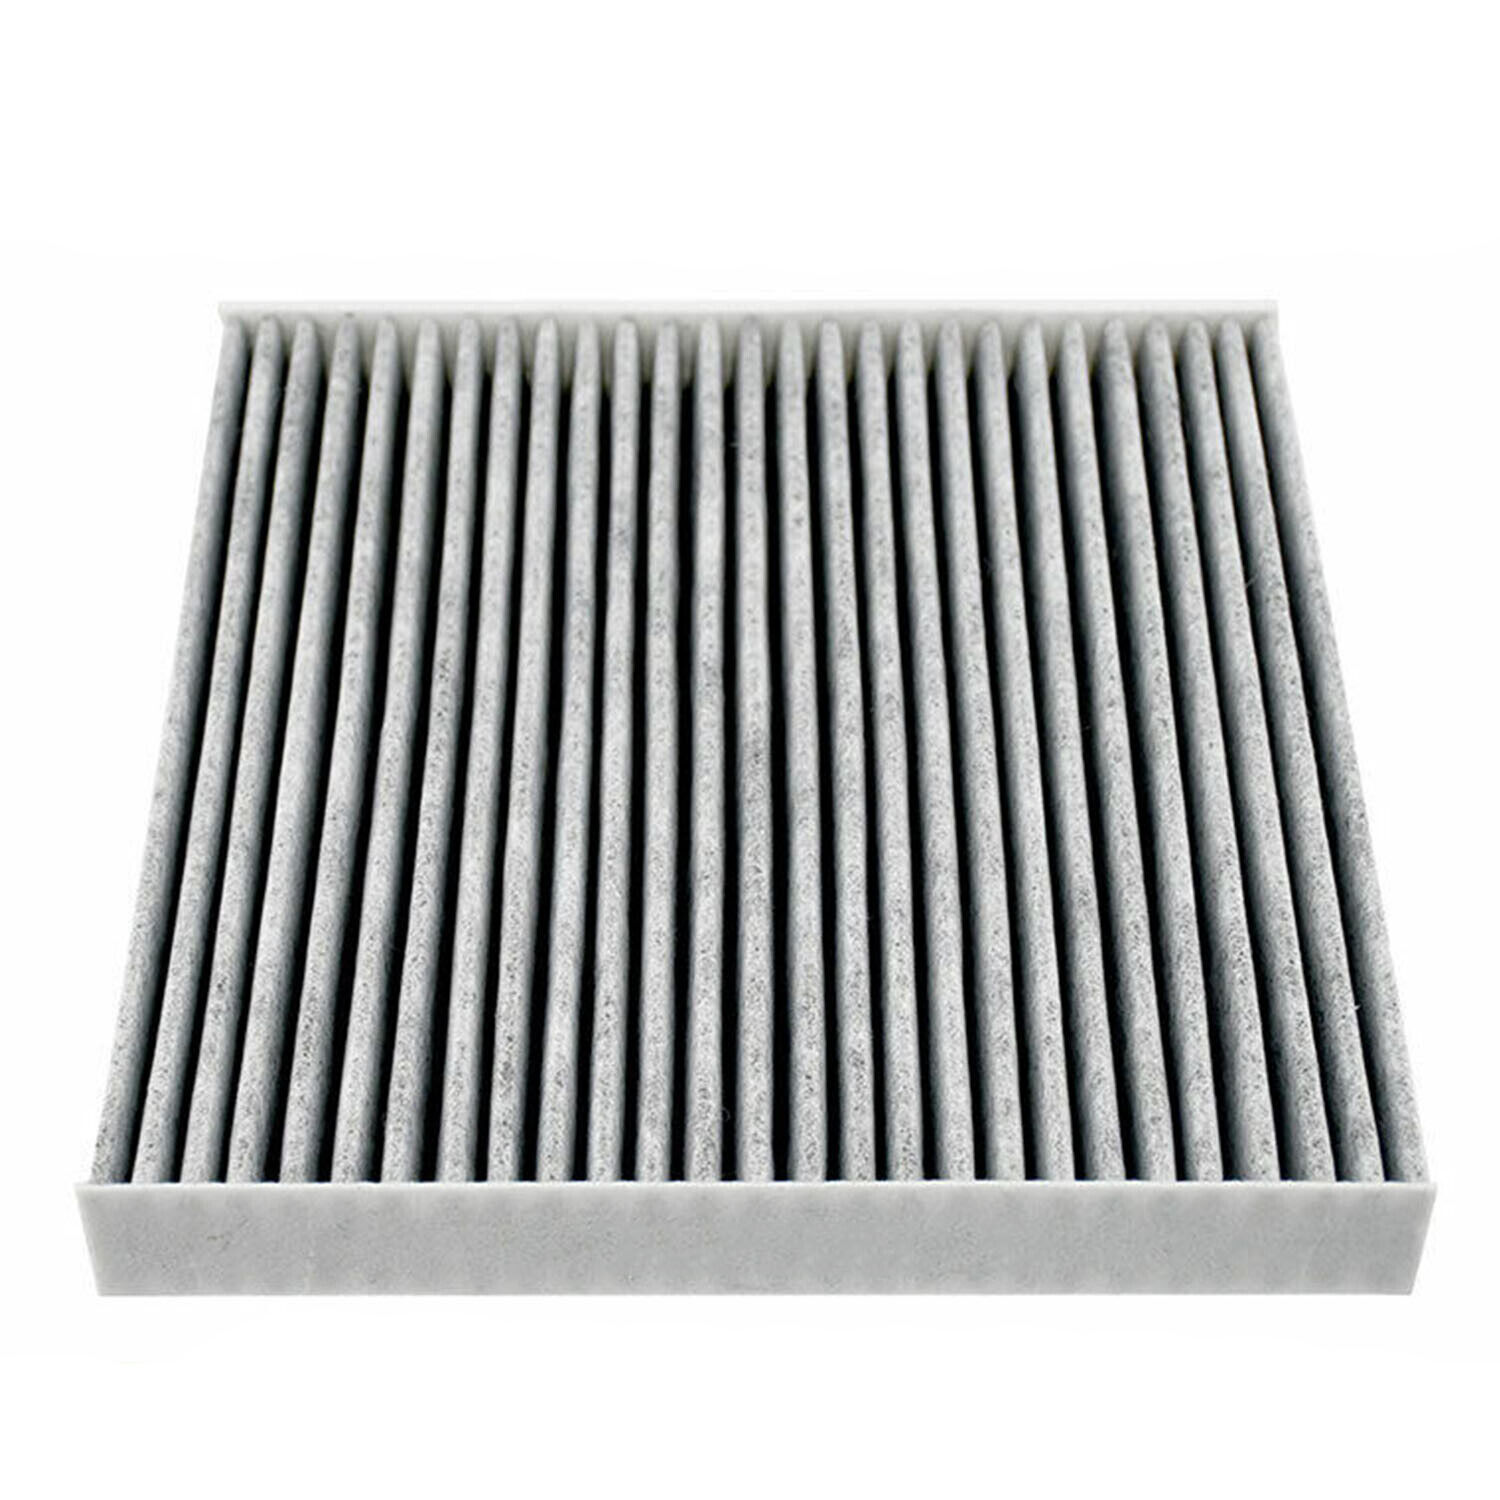 AirTechnik CF10134 Cabin Air Filter w/Activated Carbon for Acura CSX, ILX